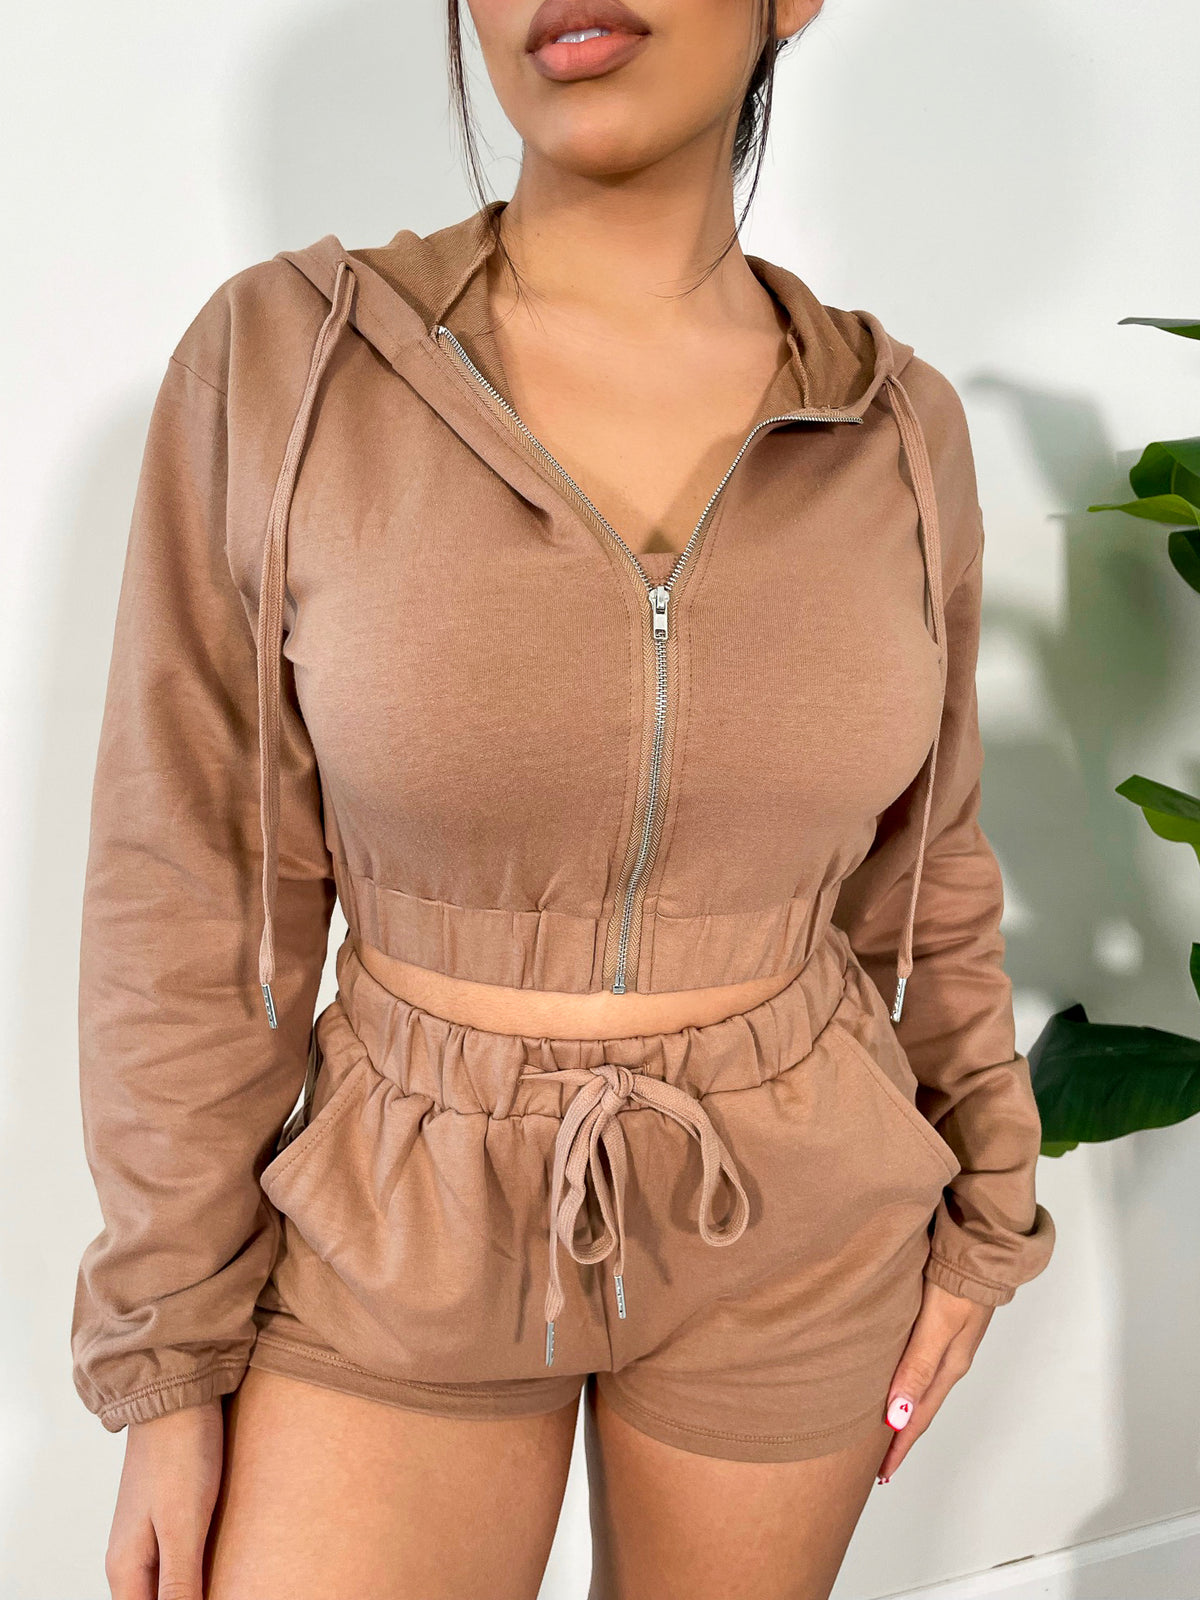 mocha 3 piece, high waist shorts with drawstring, bandeau top, cropped zip up sweater